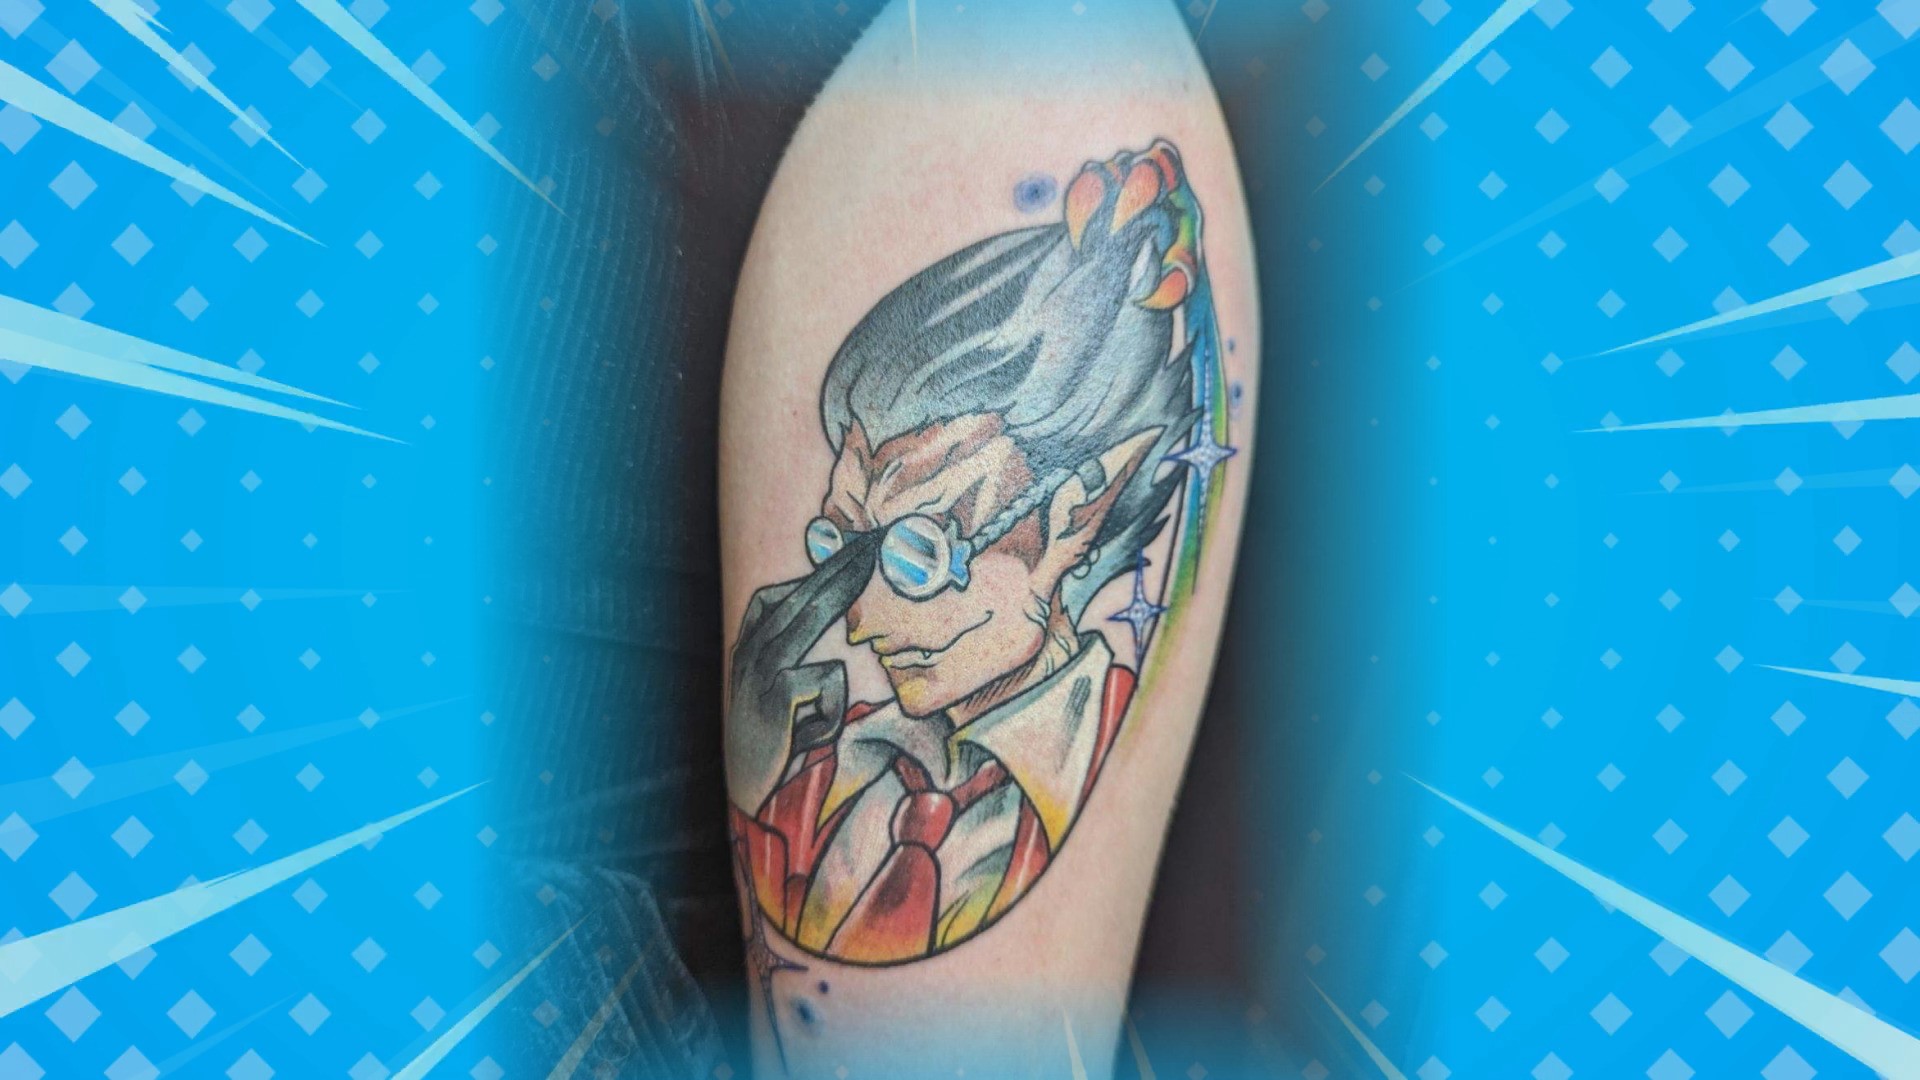 The Video Game Tattoo Convention came to town and anime's influence on the art form were quite prevalent at the event.